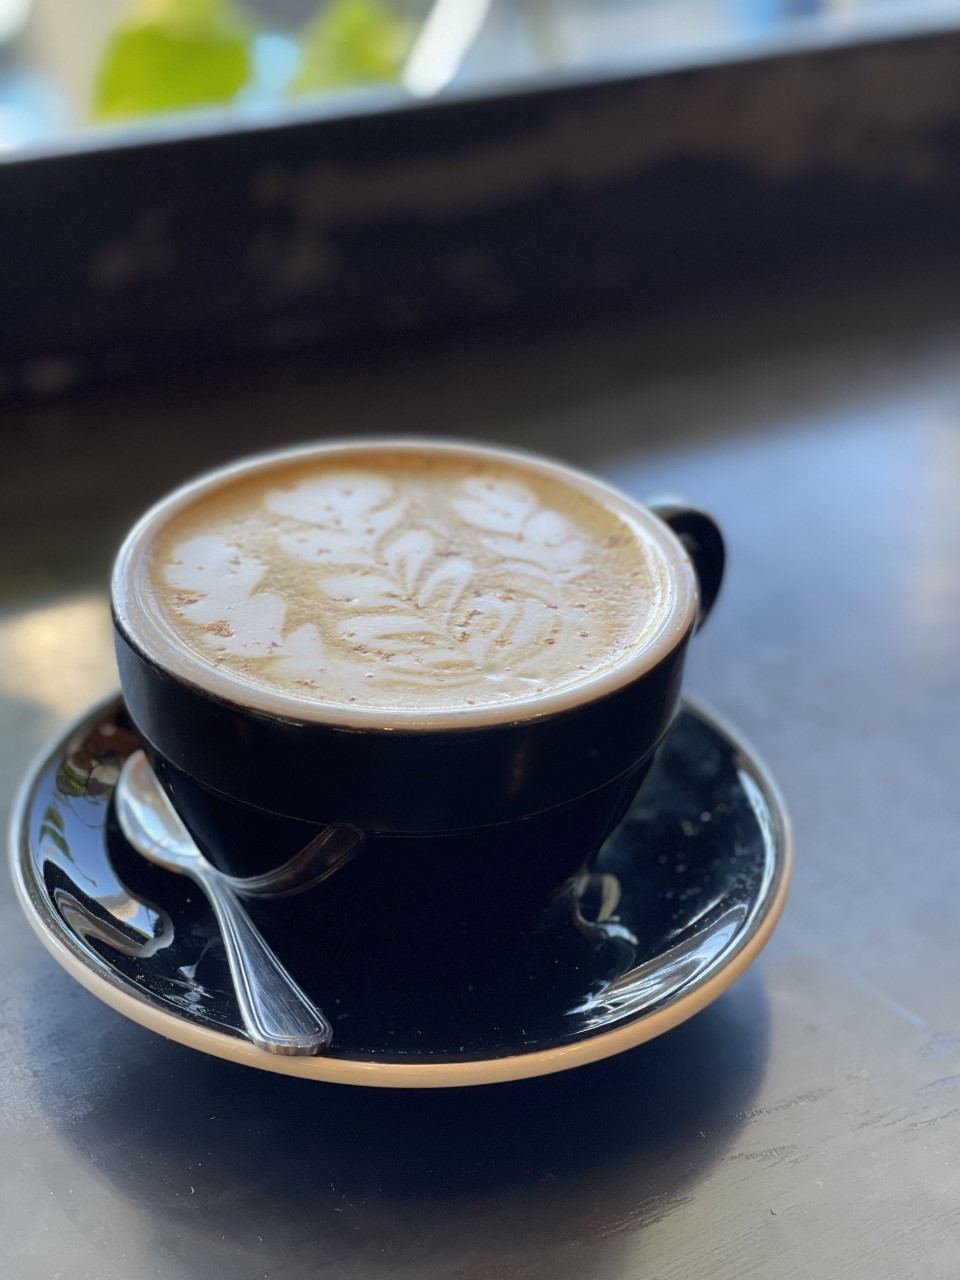 Plank's Coffee features their Pumpkin Spice latte in Healdsburg. The latte includes their roasted Pine Mountain espresso, organic pumpkin, cinnamon, ginger, cloves and nutmeg. (Planks Coffee)